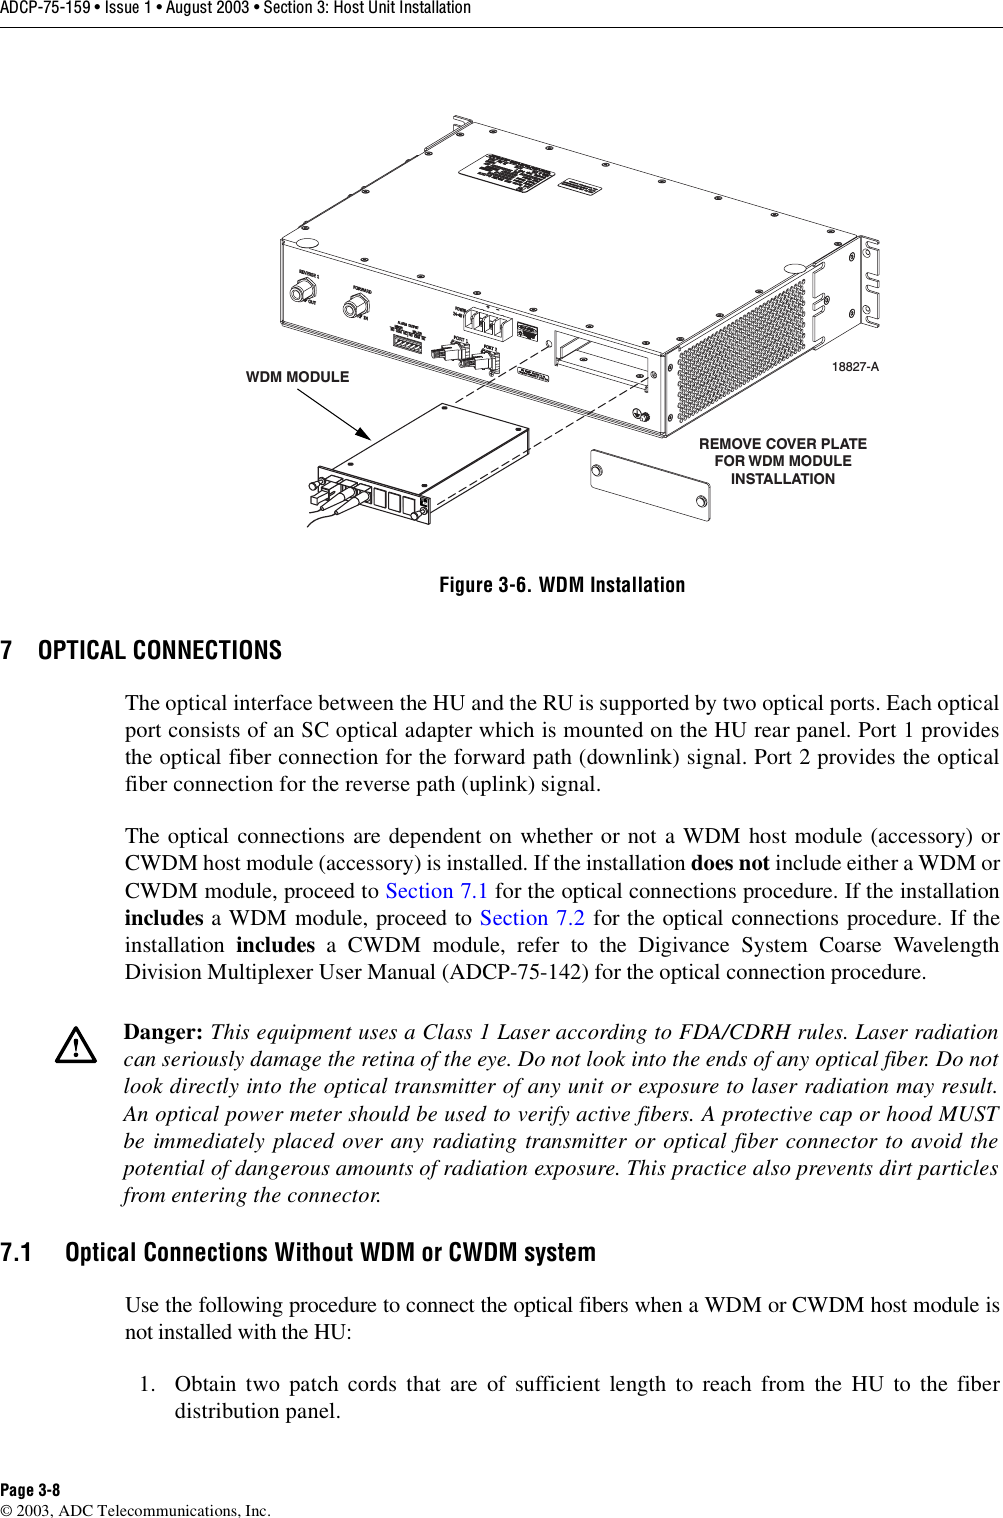 ADCP-75-159 • Issue 1 • August 2003 • Section 3: Host Unit InstallationPage 3-8© 2003, ADC Telecommunications, Inc.Figure 3-6. WDM Installation7 OPTICAL CONNECTIONSThe optical interface between the HU and the RU is supported by two optical ports. Each opticalport consists of an SC optical adapter which is mounted on the HU rear panel. Port 1 providesthe optical fiber connection for the forward path (downlink) signal. Port 2 provides the opticalfiber connection for the reverse path (uplink) signal. The optical connections are dependent on whether or not a WDM host module (accessory) orCWDM host module (accessory) is installed. If the installation does not include either a WDM orCWDM module, proceed to Section 7.1 for the optical connections procedure. If the installationincludes a WDM module, proceed to Section 7.2 for the optical connections procedure. If theinstallation  includes a CWDM module, refer to the Digivance System Coarse WavelengthDivision Multiplexer User Manual (ADCP-75-142) for the optical connection procedure. 7.1 Optical Connections Without WDM or CWDM systemUse the following procedure to connect the optical fibers when a WDM or CWDM host module isnot installed with the HU: 1. Obtain two patch cords that are of sufficient length to reach from the HU to the fiberdistribution panel. Danger: This equipment uses a Class 1 Laser according to FDA/CDRH rules. Laser radiationcan seriously damage the retina of the eye. Do not look into the ends of any optical fiber. Do notlook directly into the optical transmitter of any unit or exposure to laser radiation may result.An optical power meter should be used to verify active fibers. A protective cap or hood MUSTbe immediately placed over any radiating transmitter or optical fiber connector to avoid thepotential of dangerous amounts of radiation exposure. This practice also prevents dirt particlesfrom entering the connector. 18827-AREMOVE COVER PLATEFOR WDM MODULEINSTALLATIONWDM MODULE